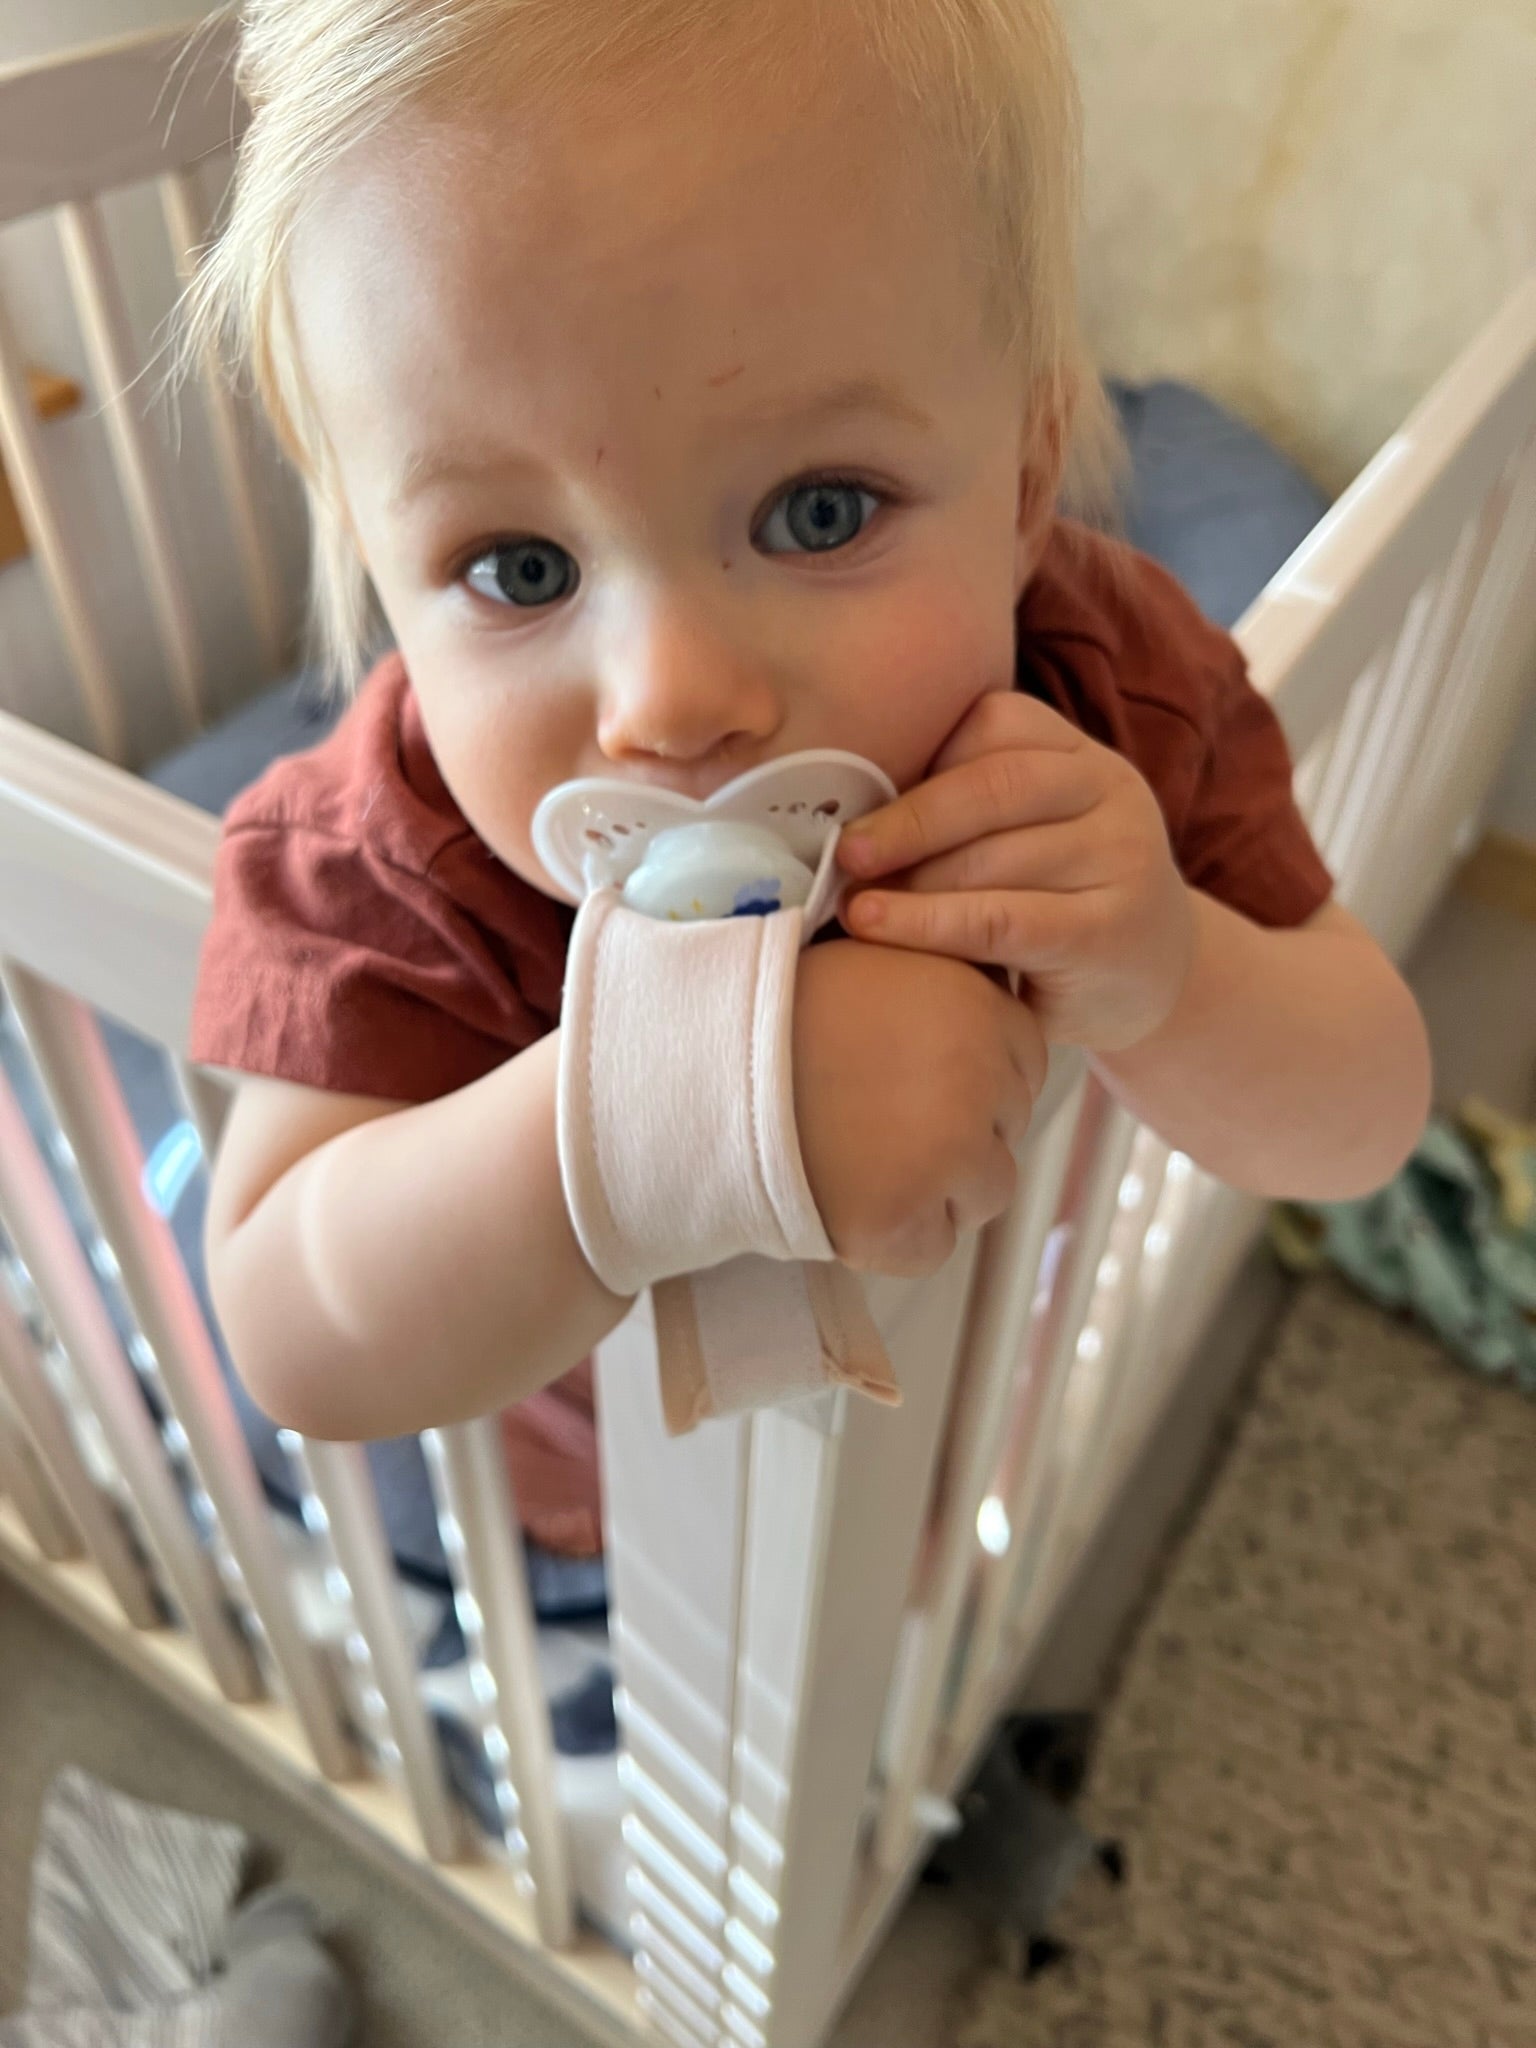 How to Comfort a Teething Baby